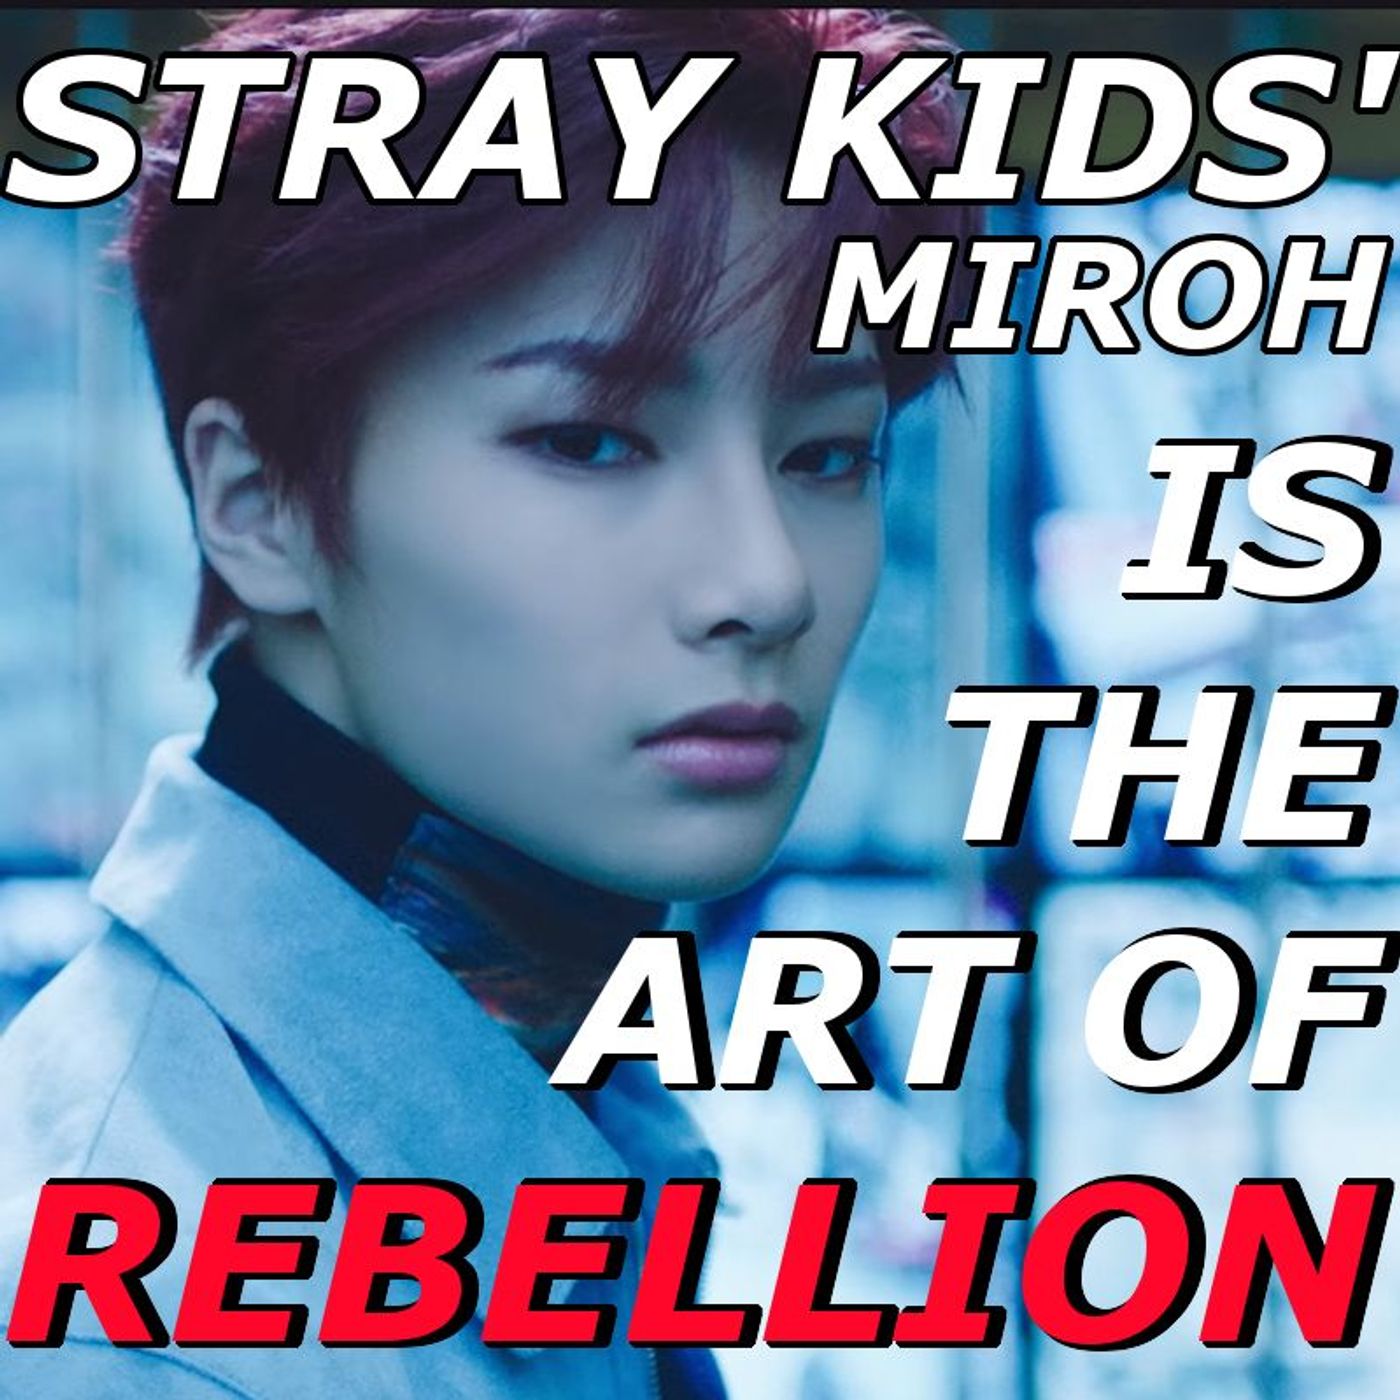 Stray Kids’ ”Miroh” Is The Art of Rebellion